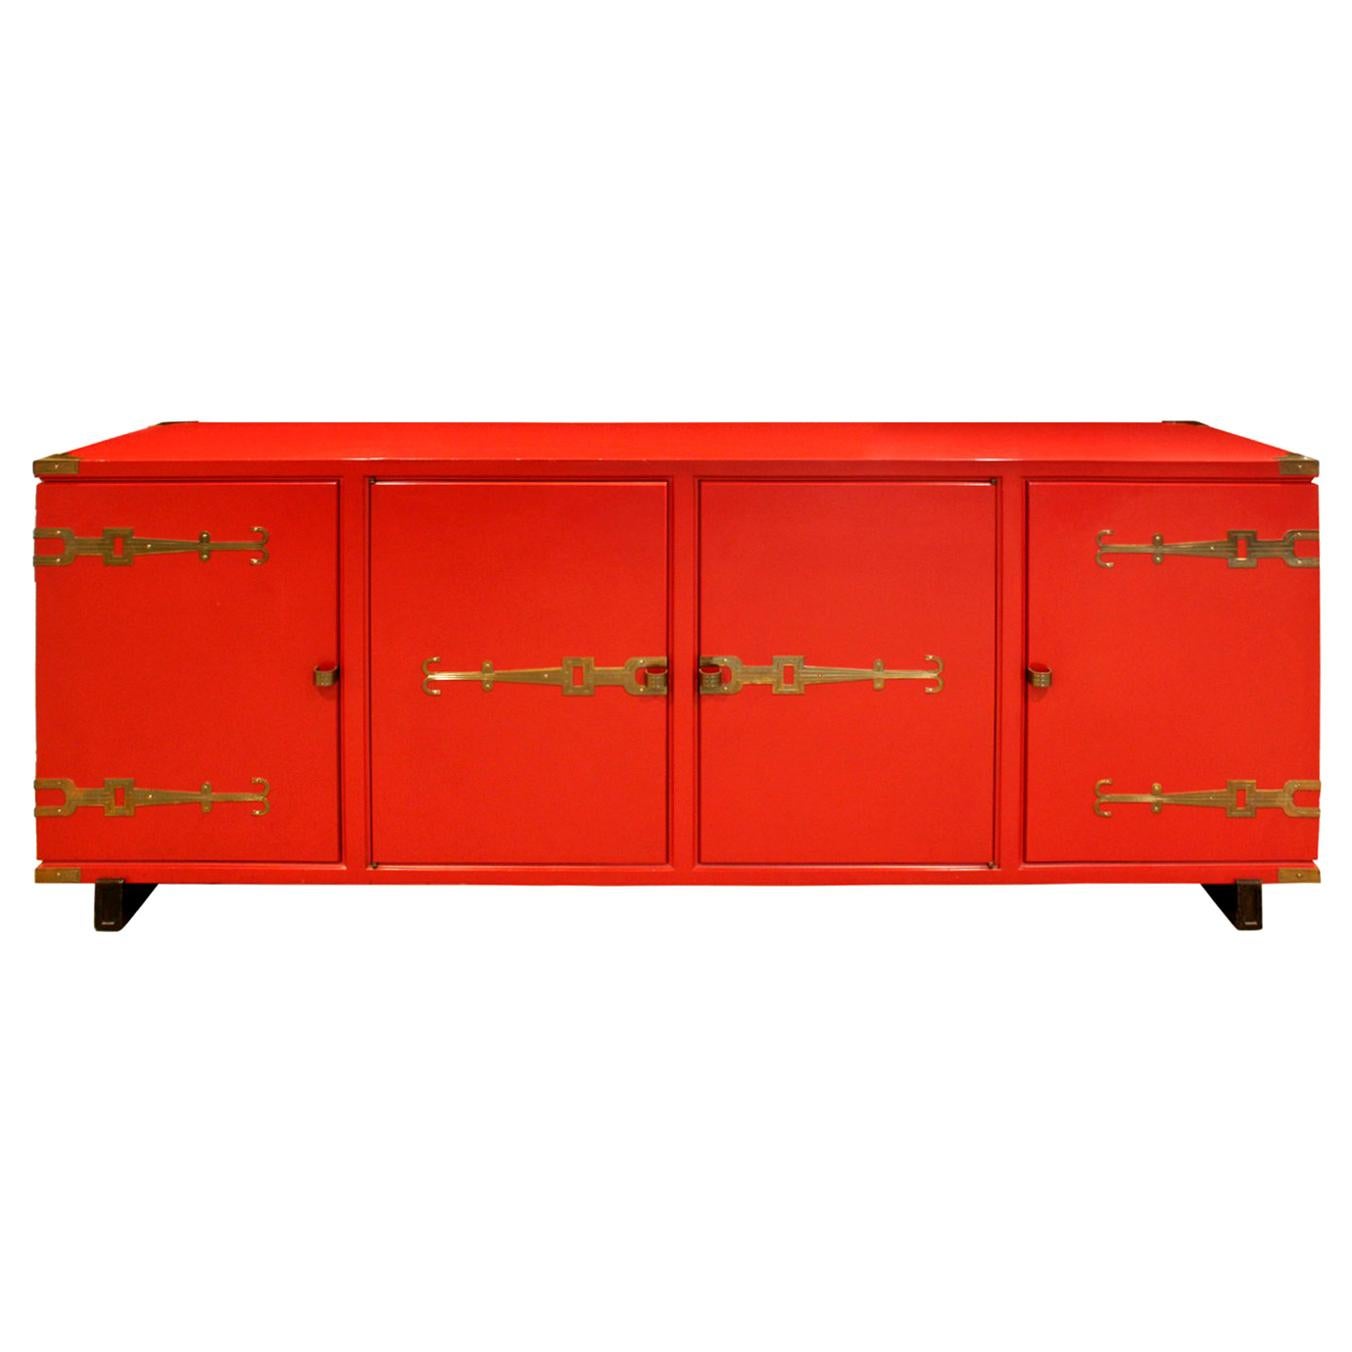 Tommi Parzinger 4 Door Chinese Red Cabinet With Iconic Hardware 1950s